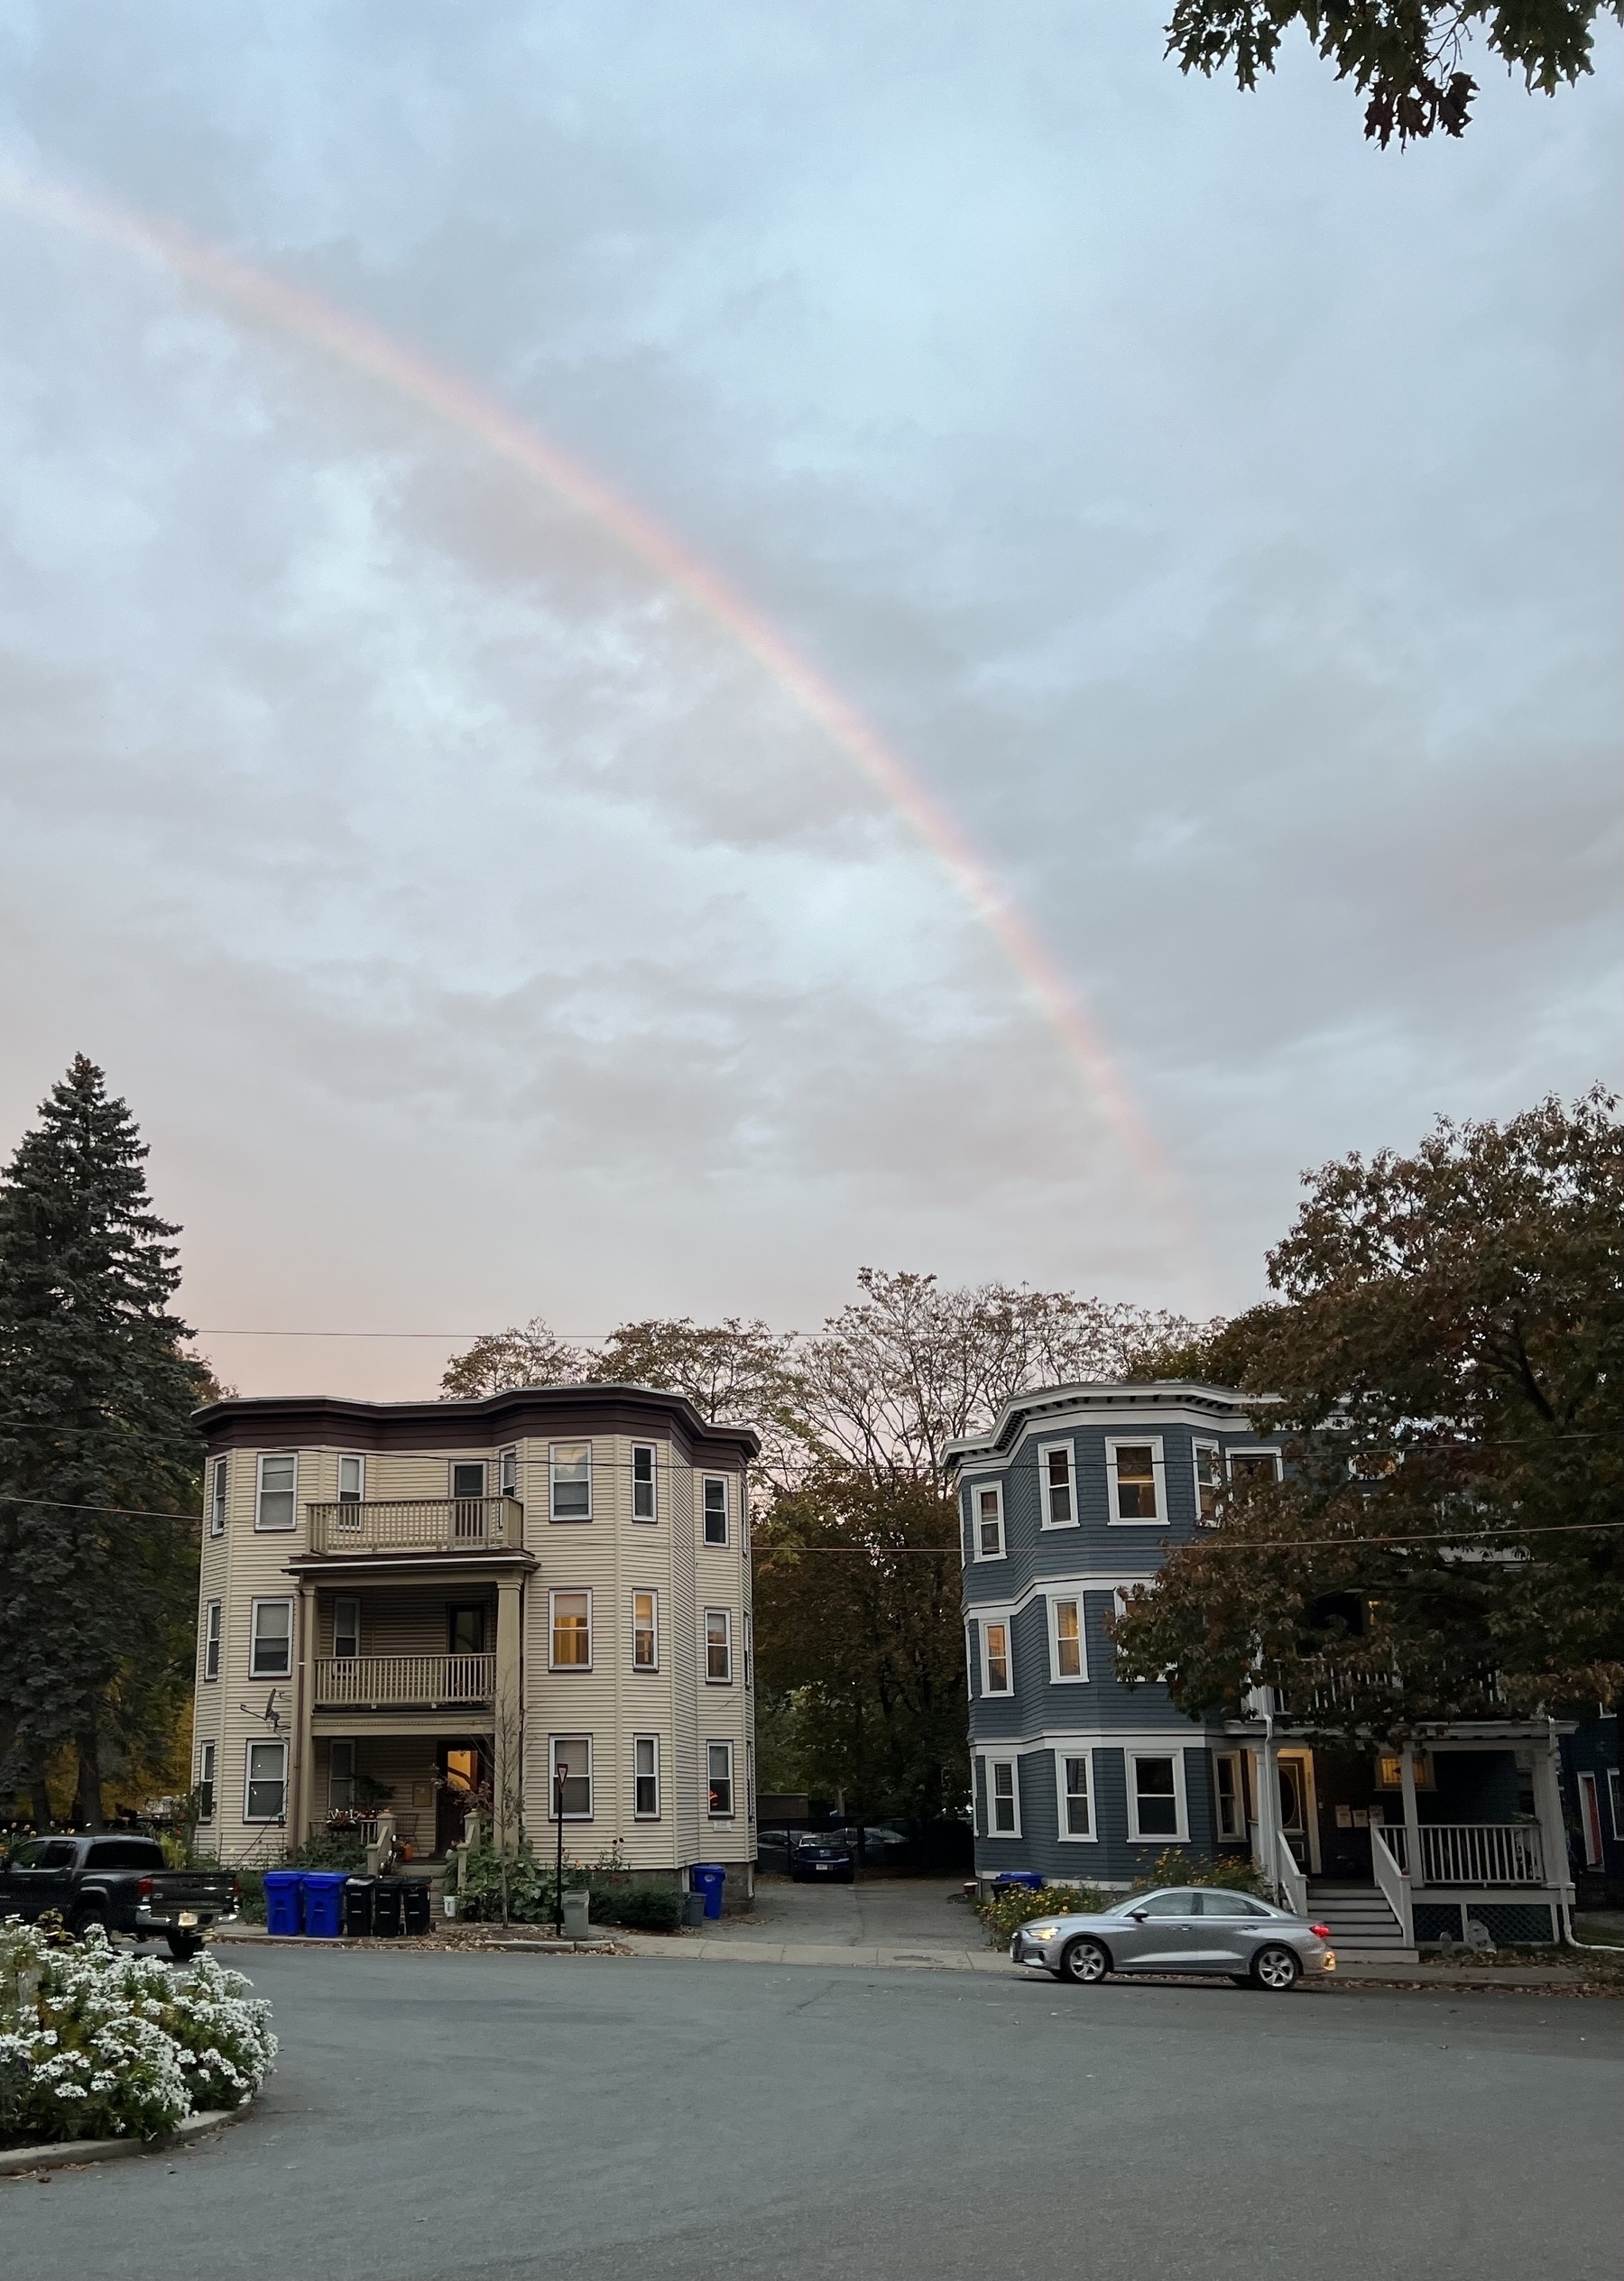 A rainbow arches over two triple-decker houses in Brookline, MA.